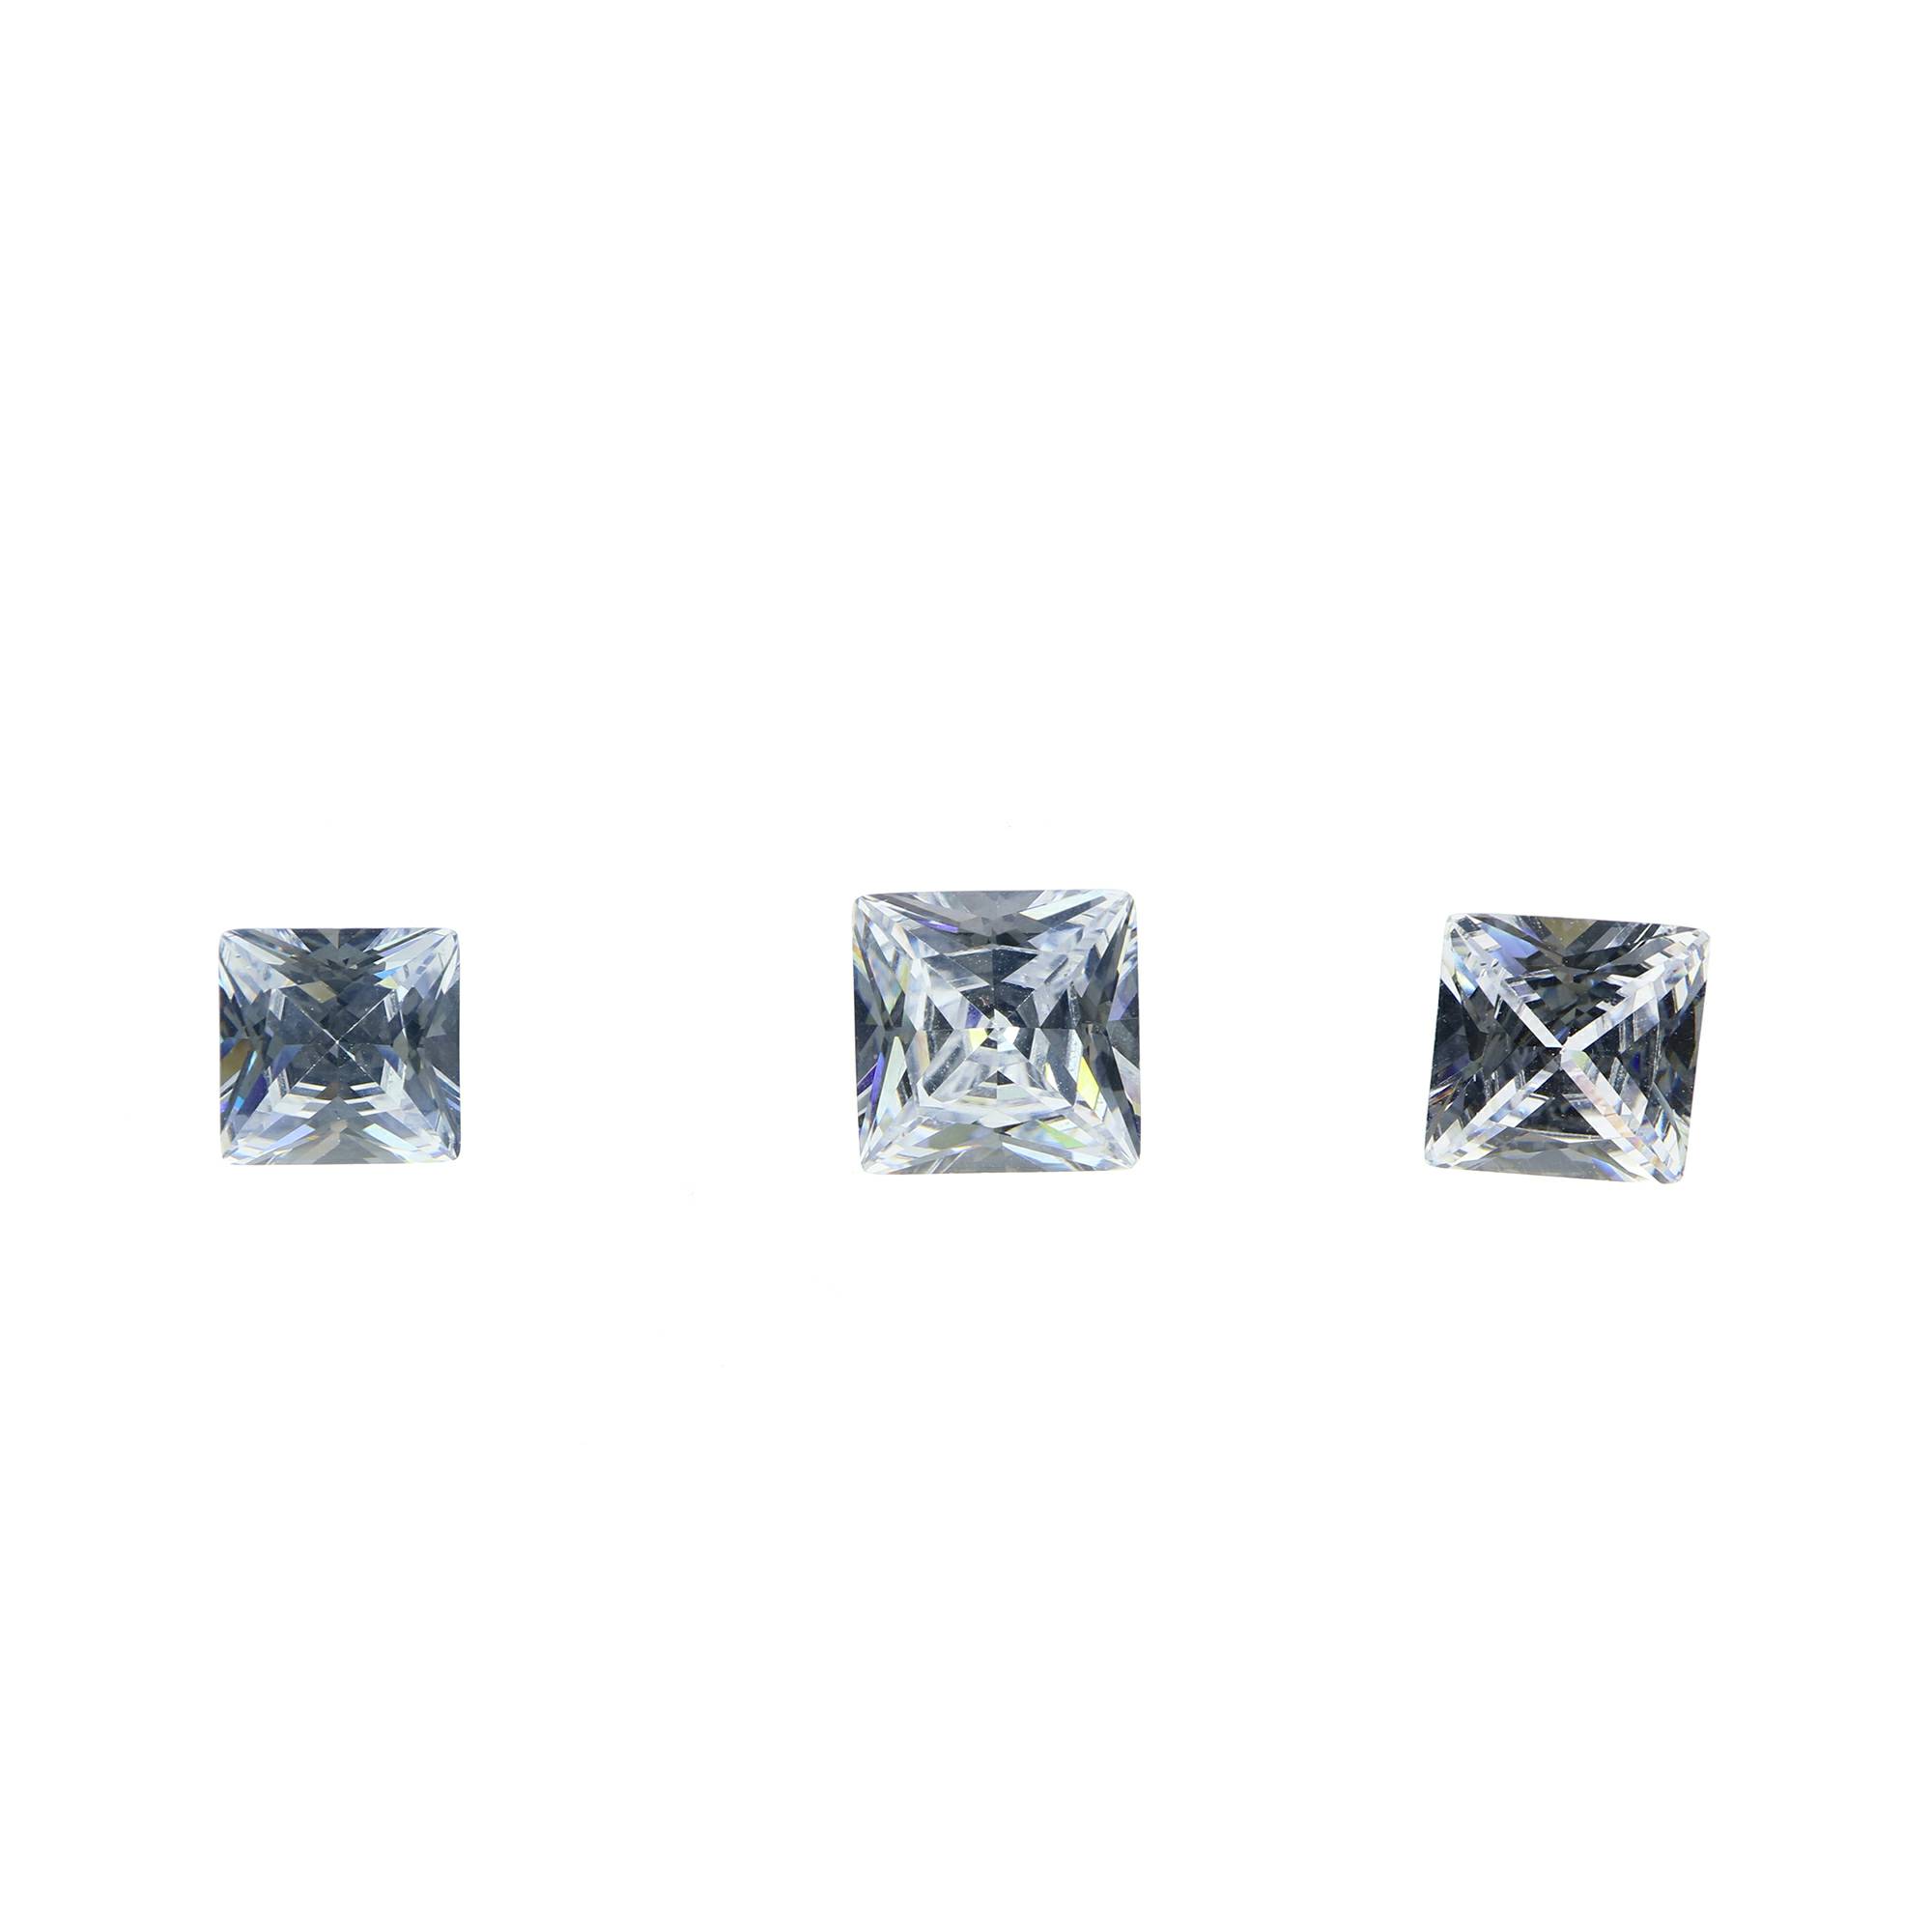 1Pcs Multiple Size Square Princess Cut Moissanite Stone Faceted Imitated Diamond Loose Gemstone for DIY Engagement Ring D Color VVS1 Excellent Cut 4140014 - Click Image to Close